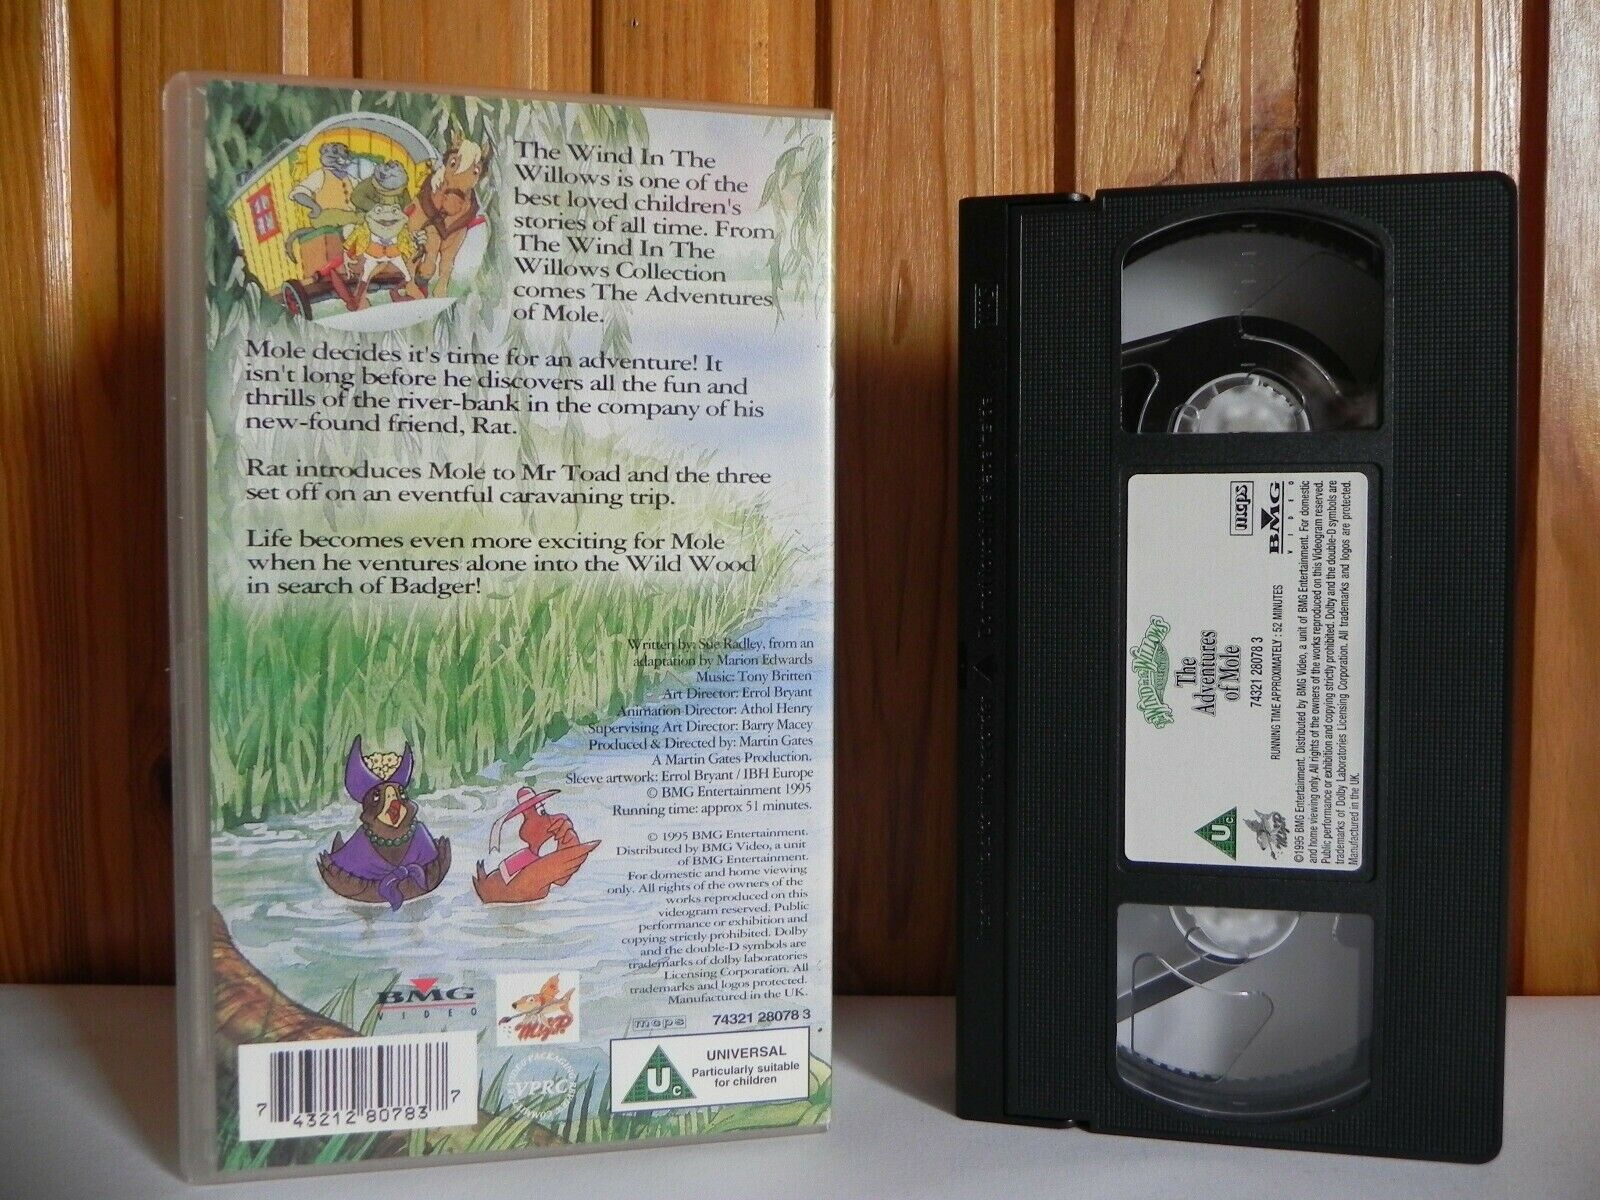 The Wind In The Willows: The Adventures Of Mole [Animated] Children's - Pal VHS-